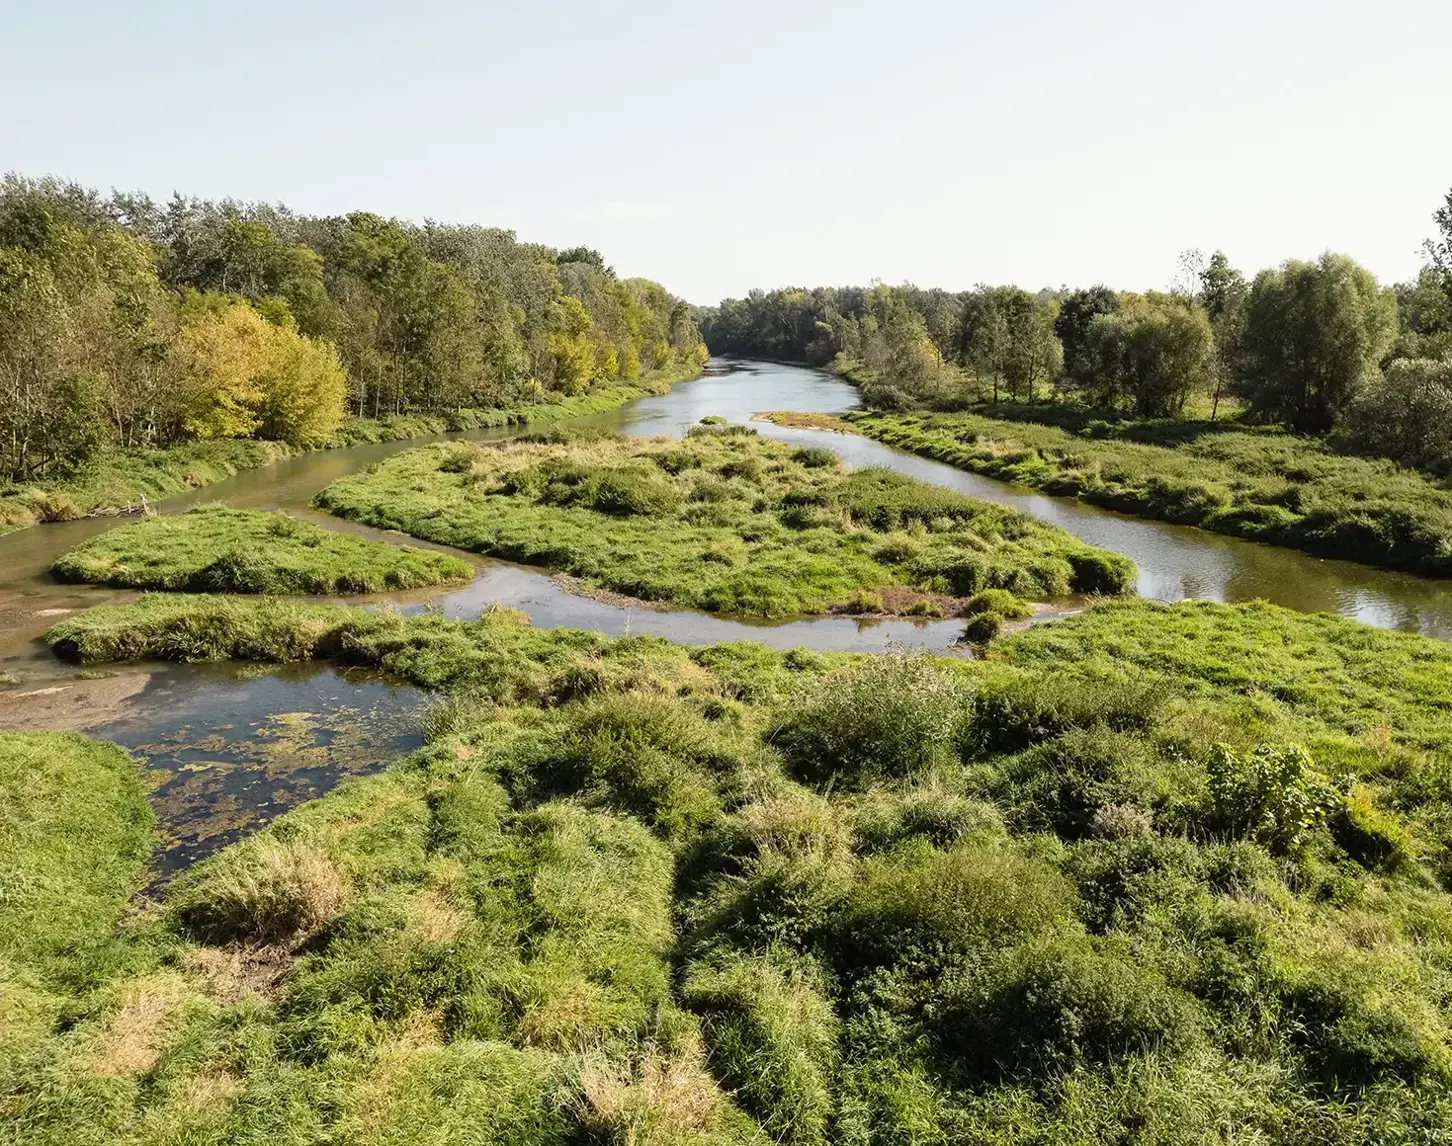 LIFE+ Traisen project: The river landscape with meadows and shrubs will now continue to develop undisturbed in a natural way.